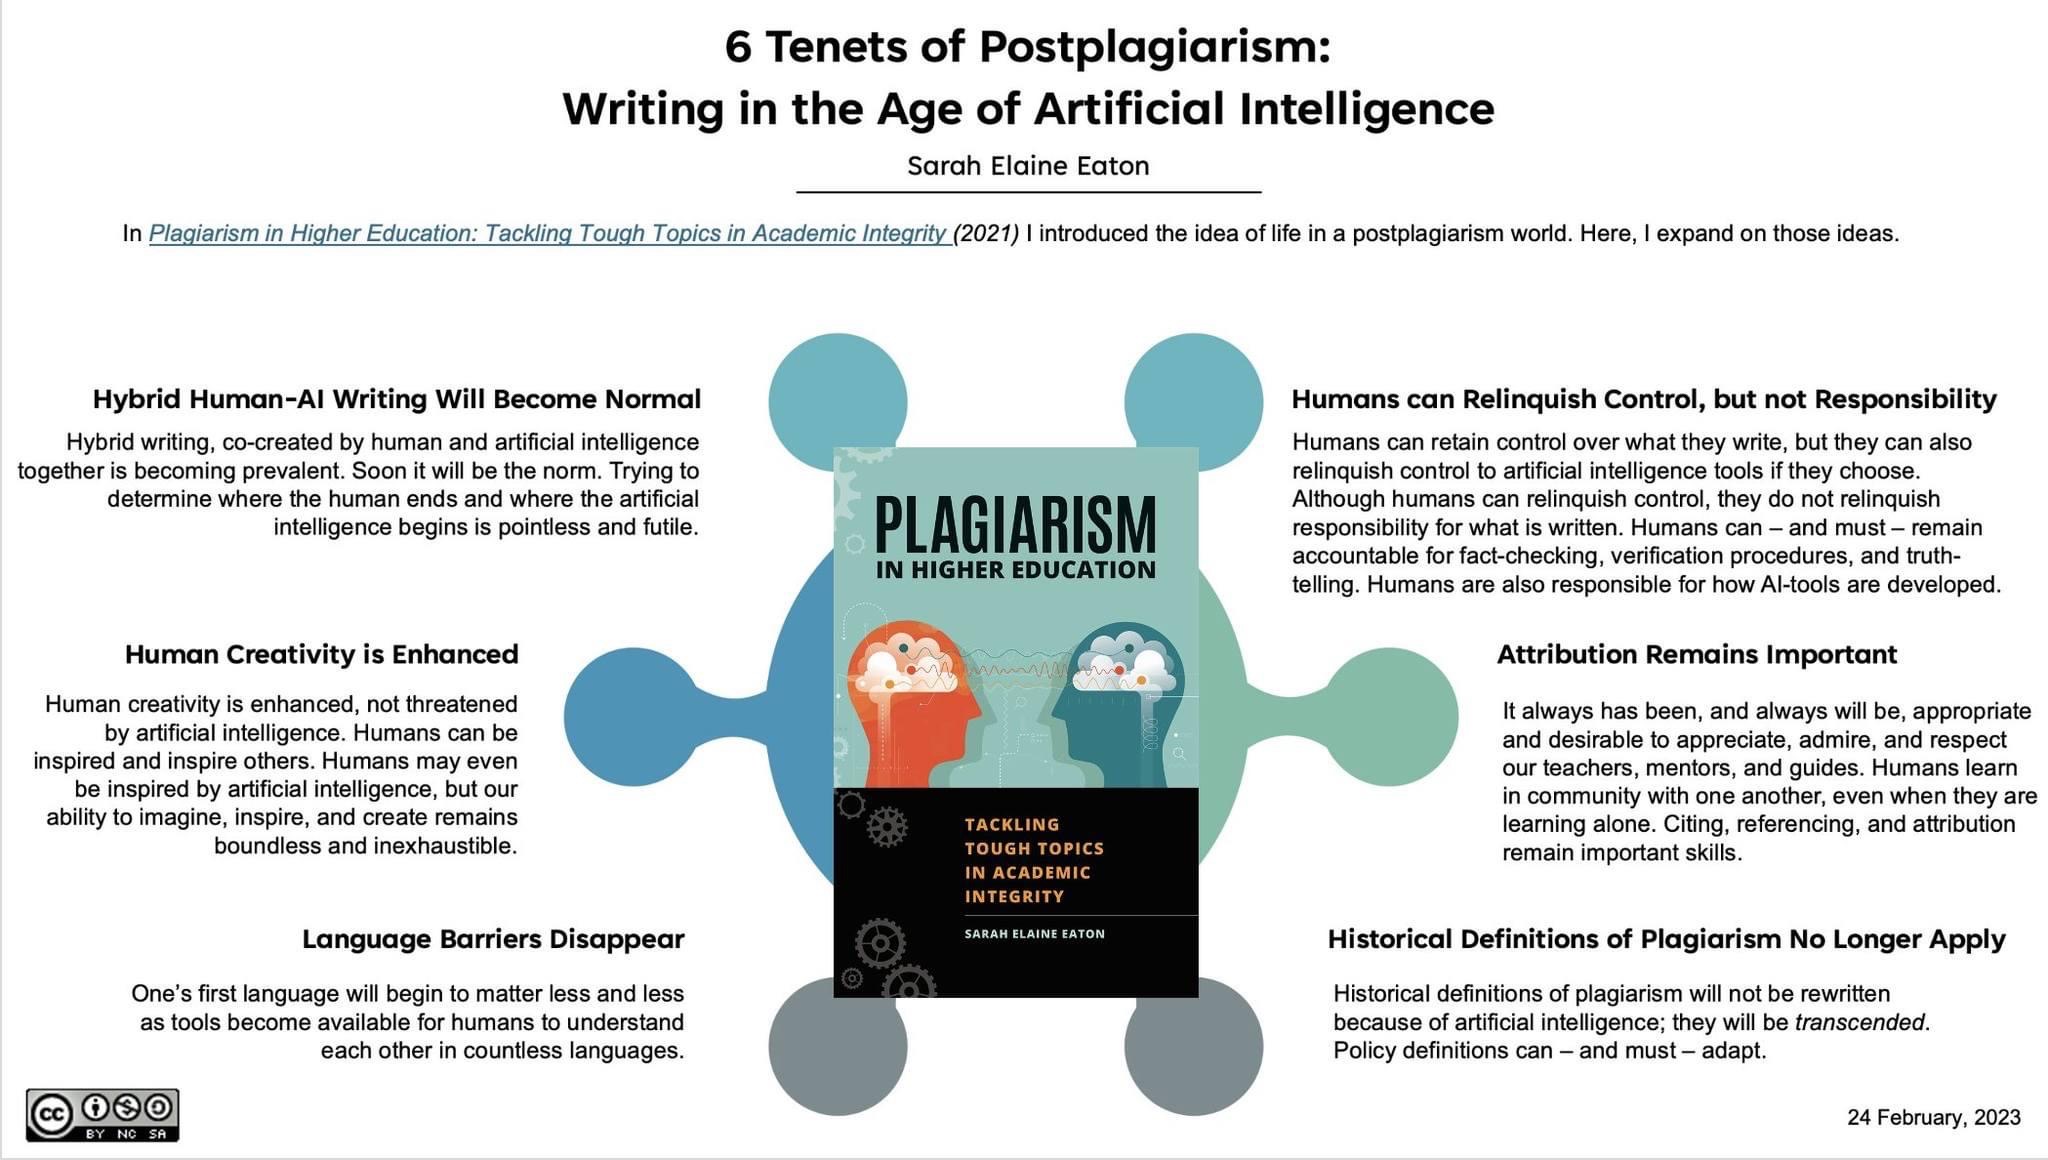 a infographic with text explaining the changes in regard of plagiarism in as impacted by AI